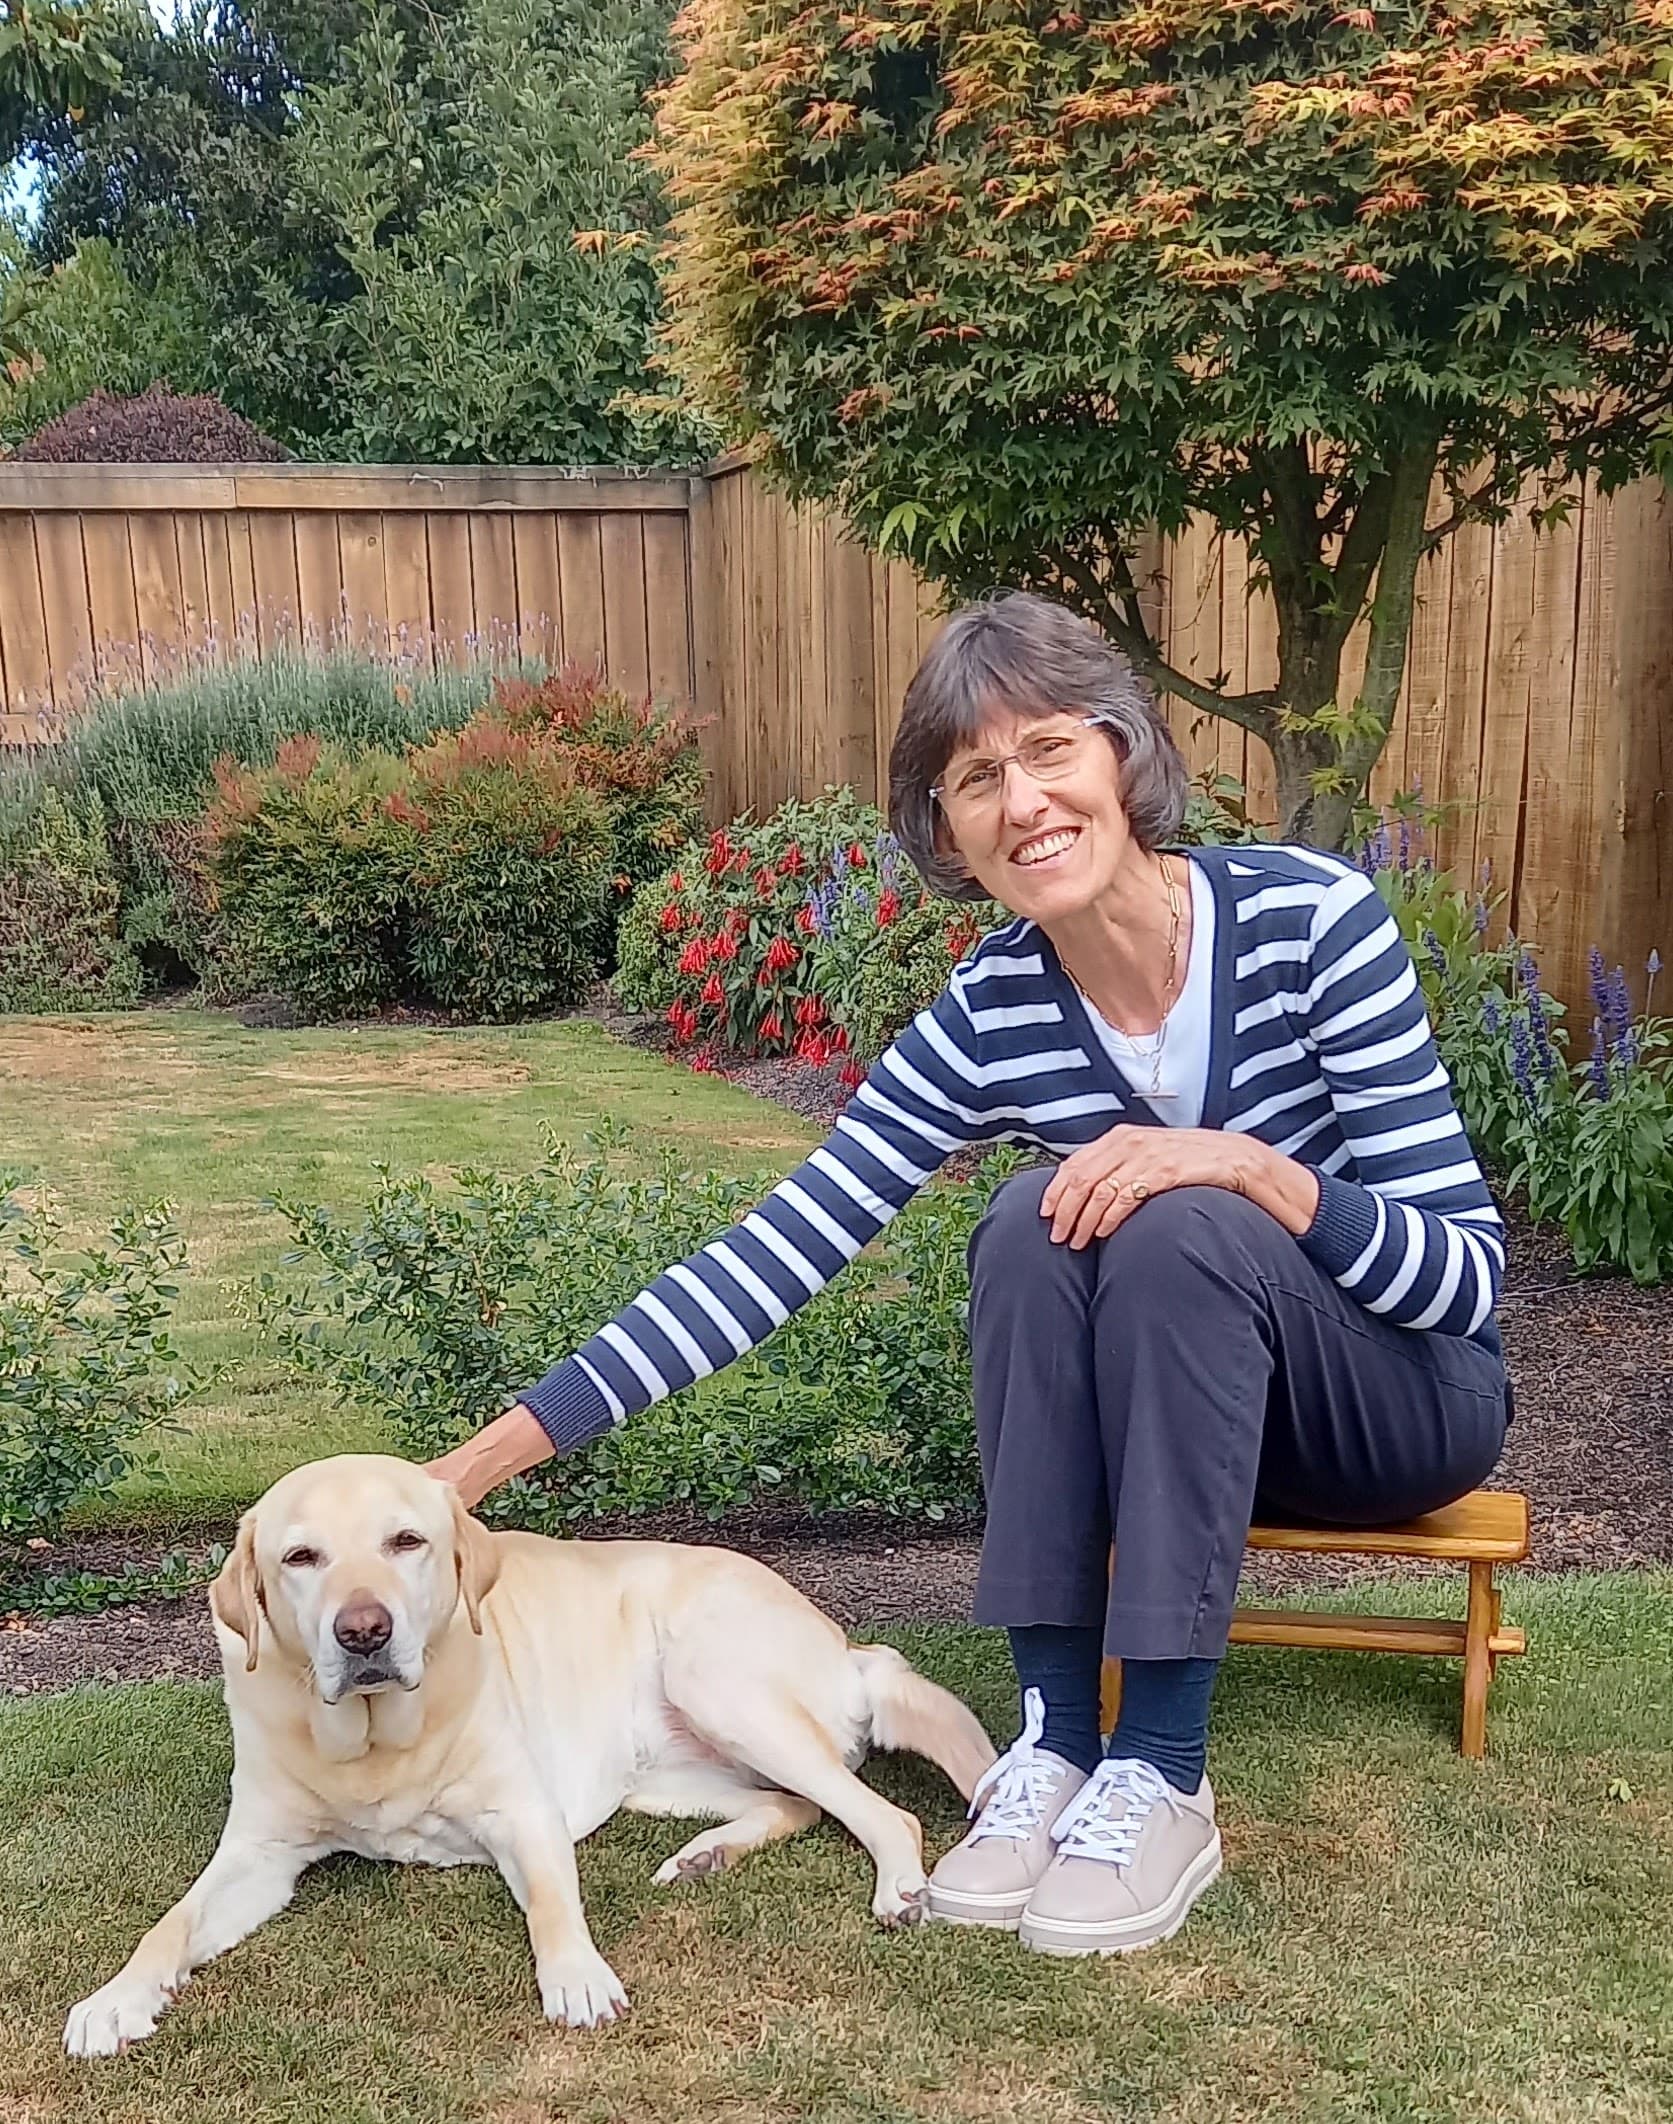 Visionary Ruth sitting in her garden, smiling for the camera. She is patting a golden retriever who is lying at her feet.